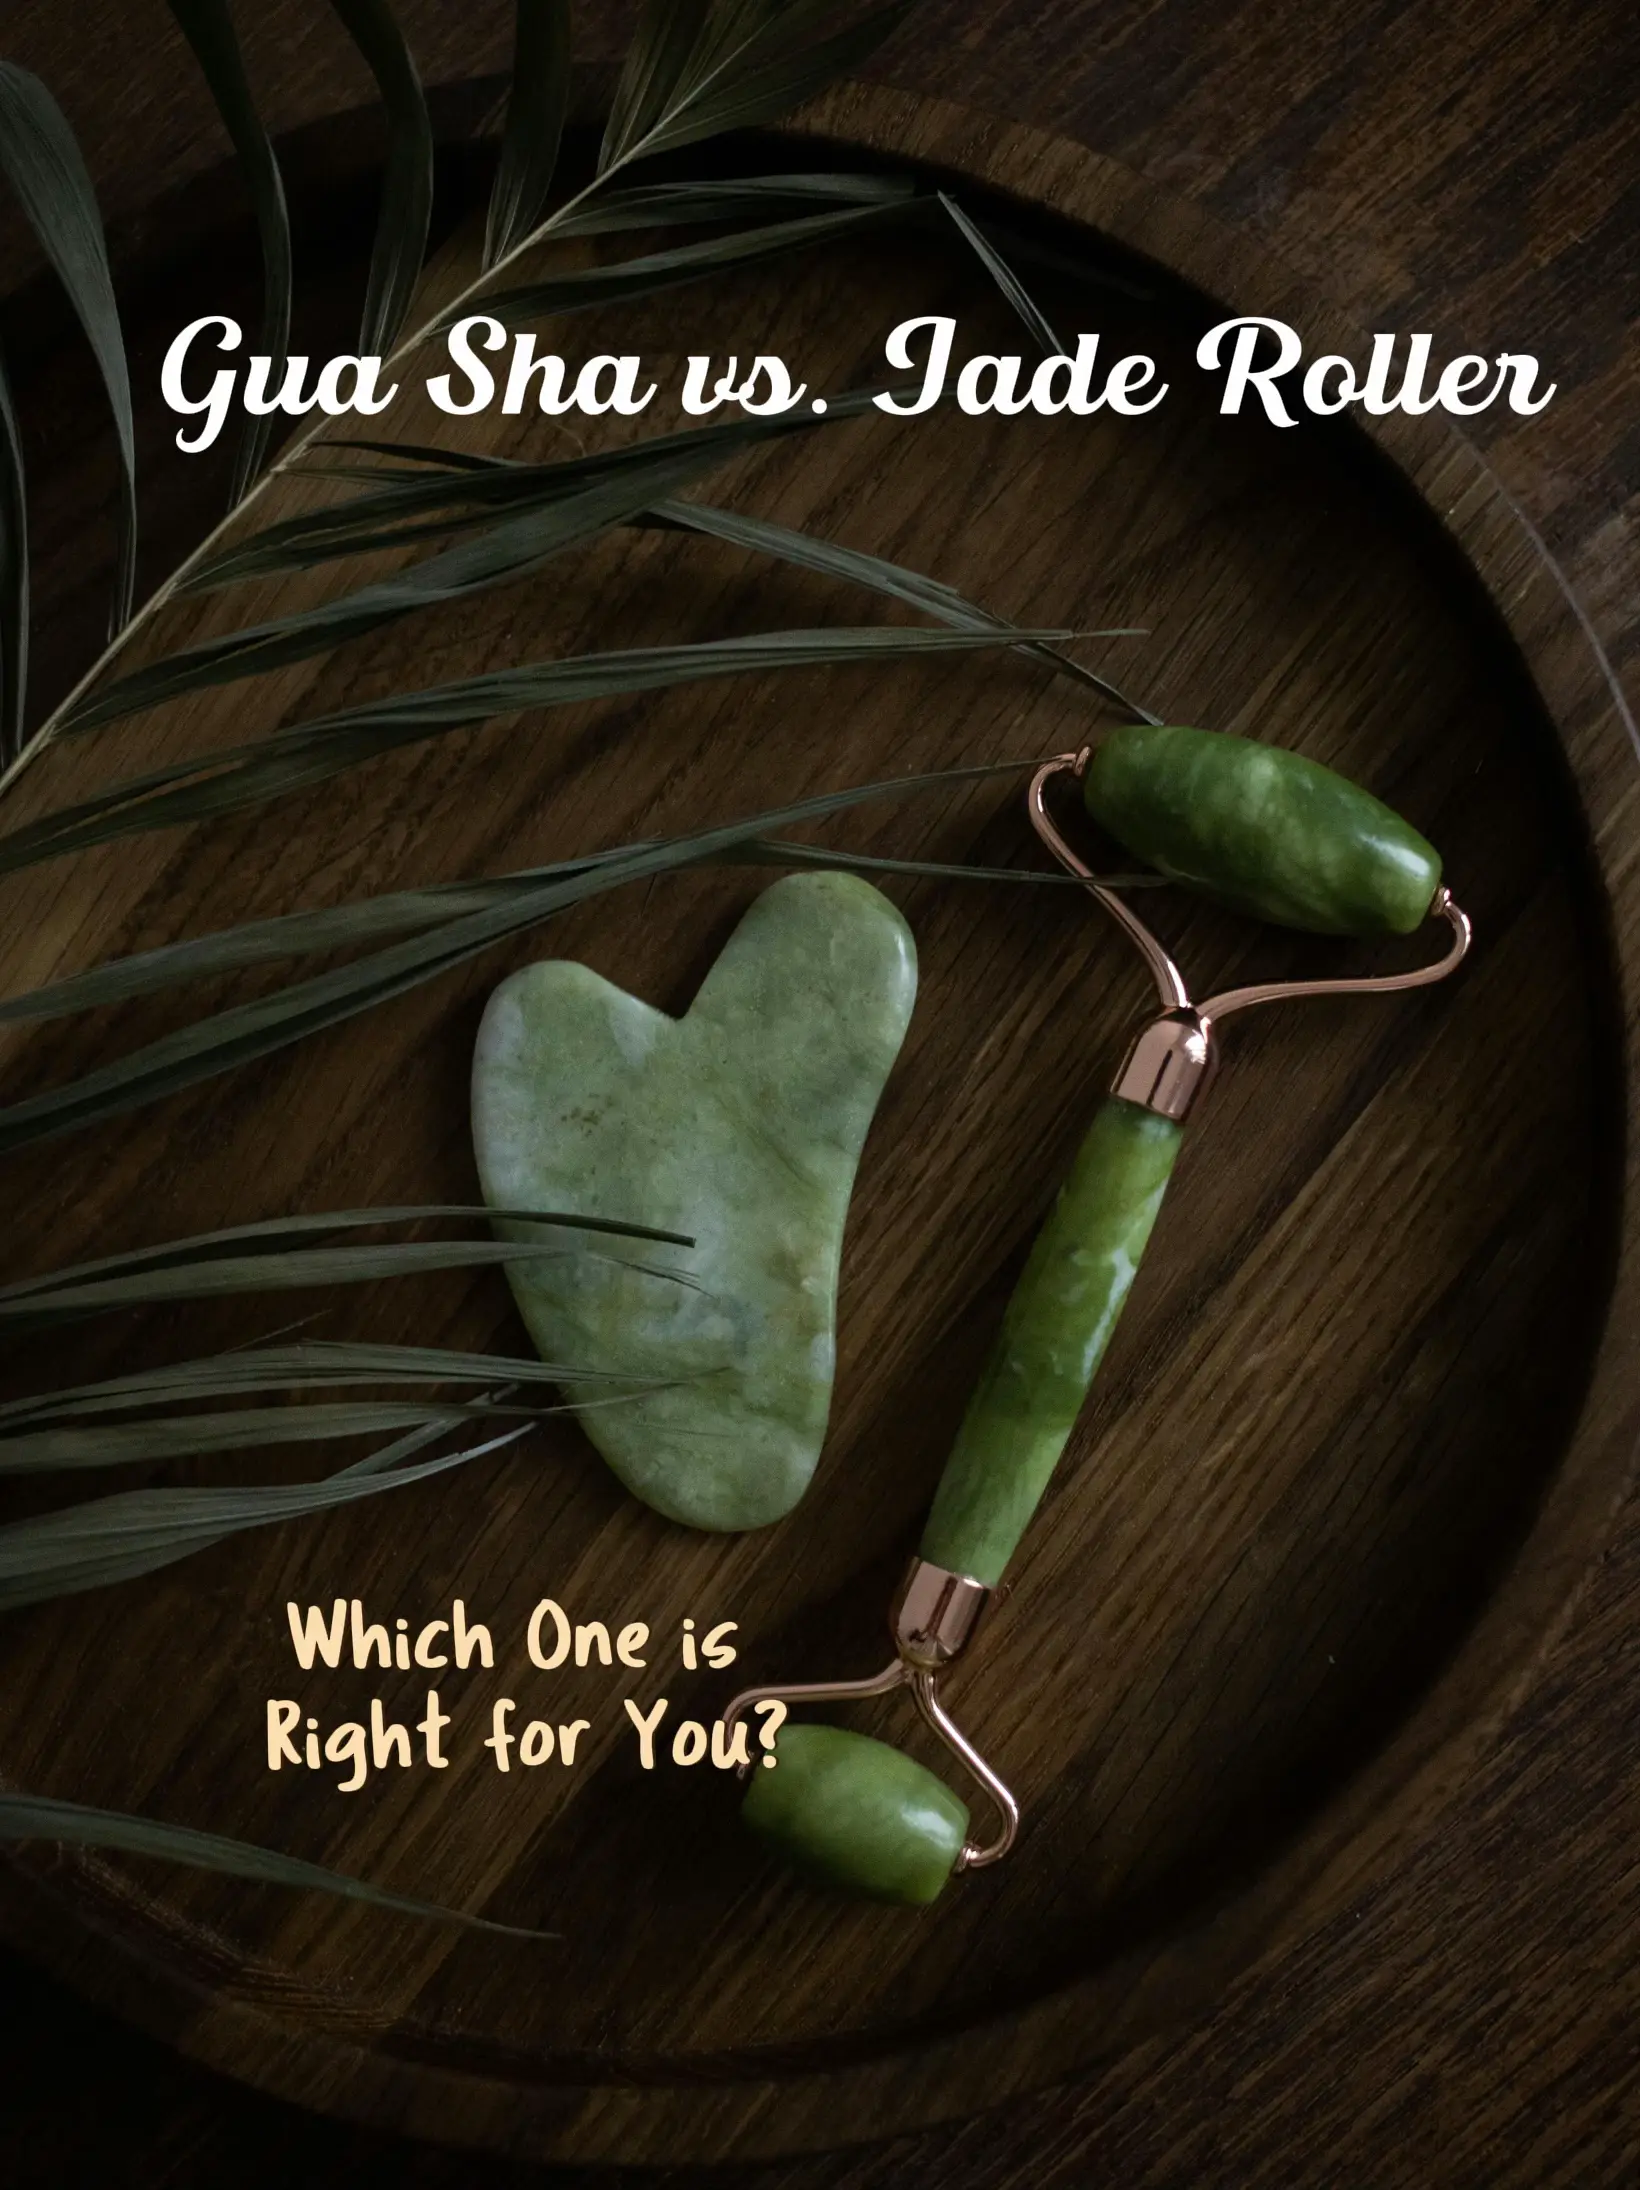 Gua Sha vs. Jade Roller vs. Ice Roller: What's The Difference?